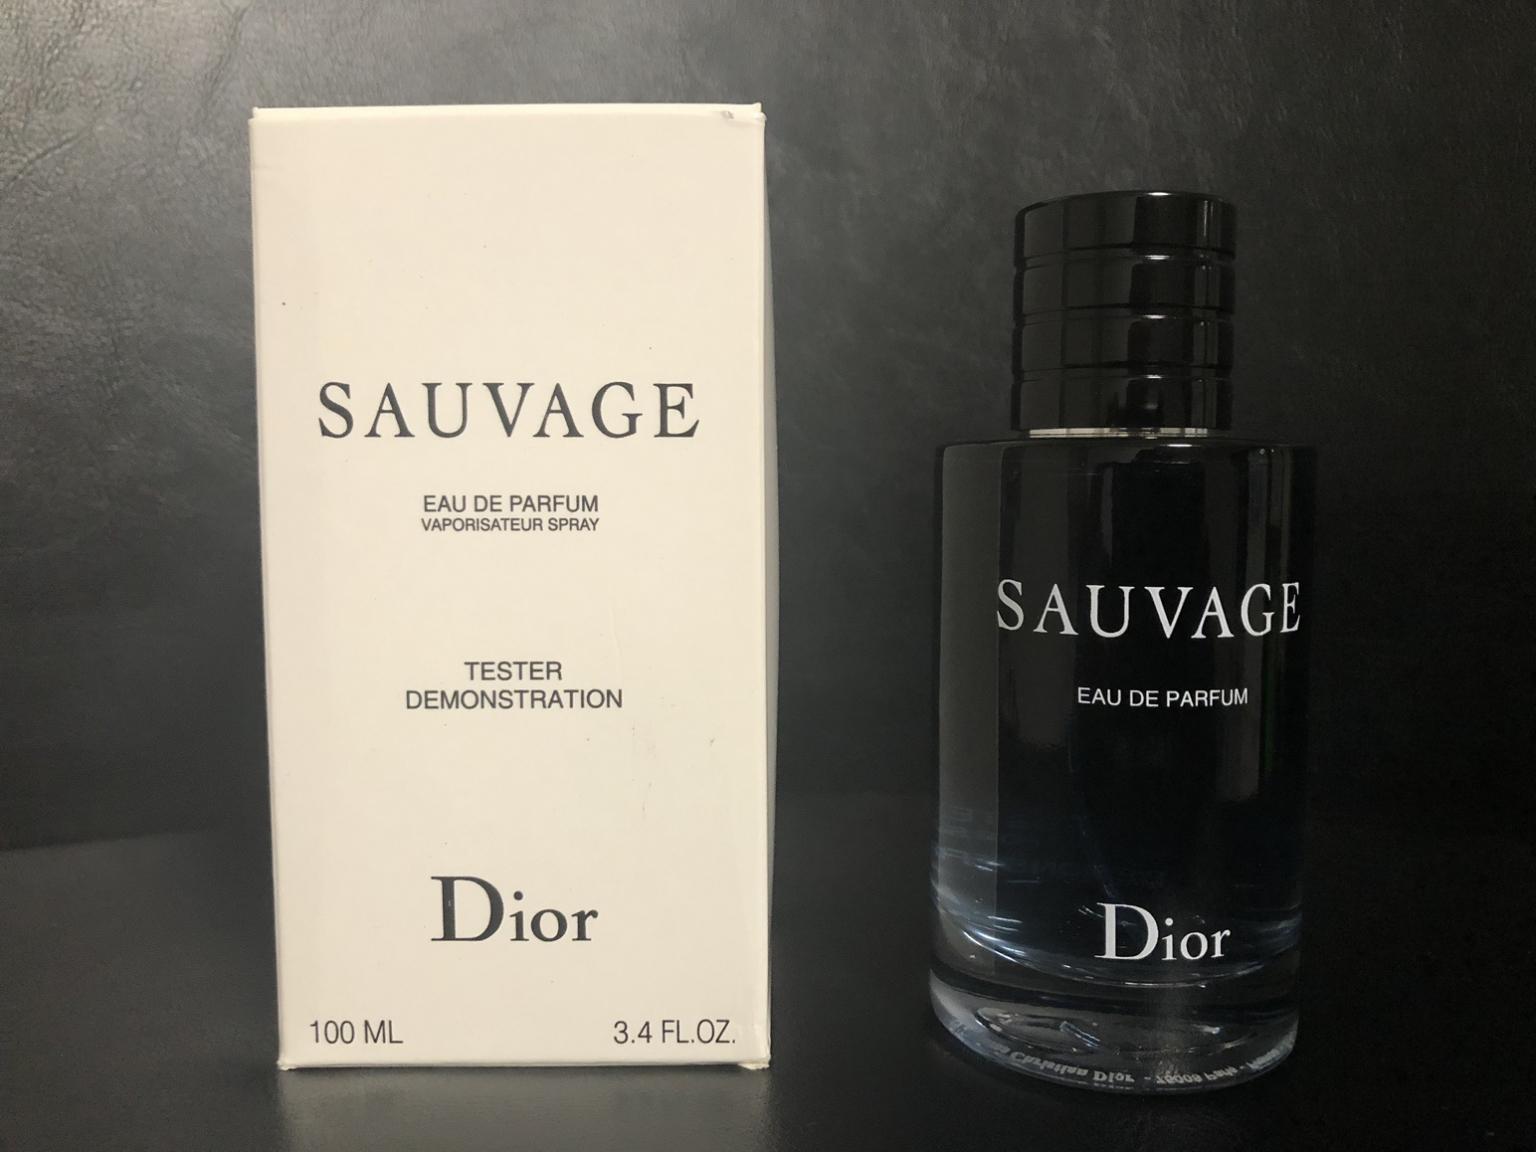 sauvage cologne black friday